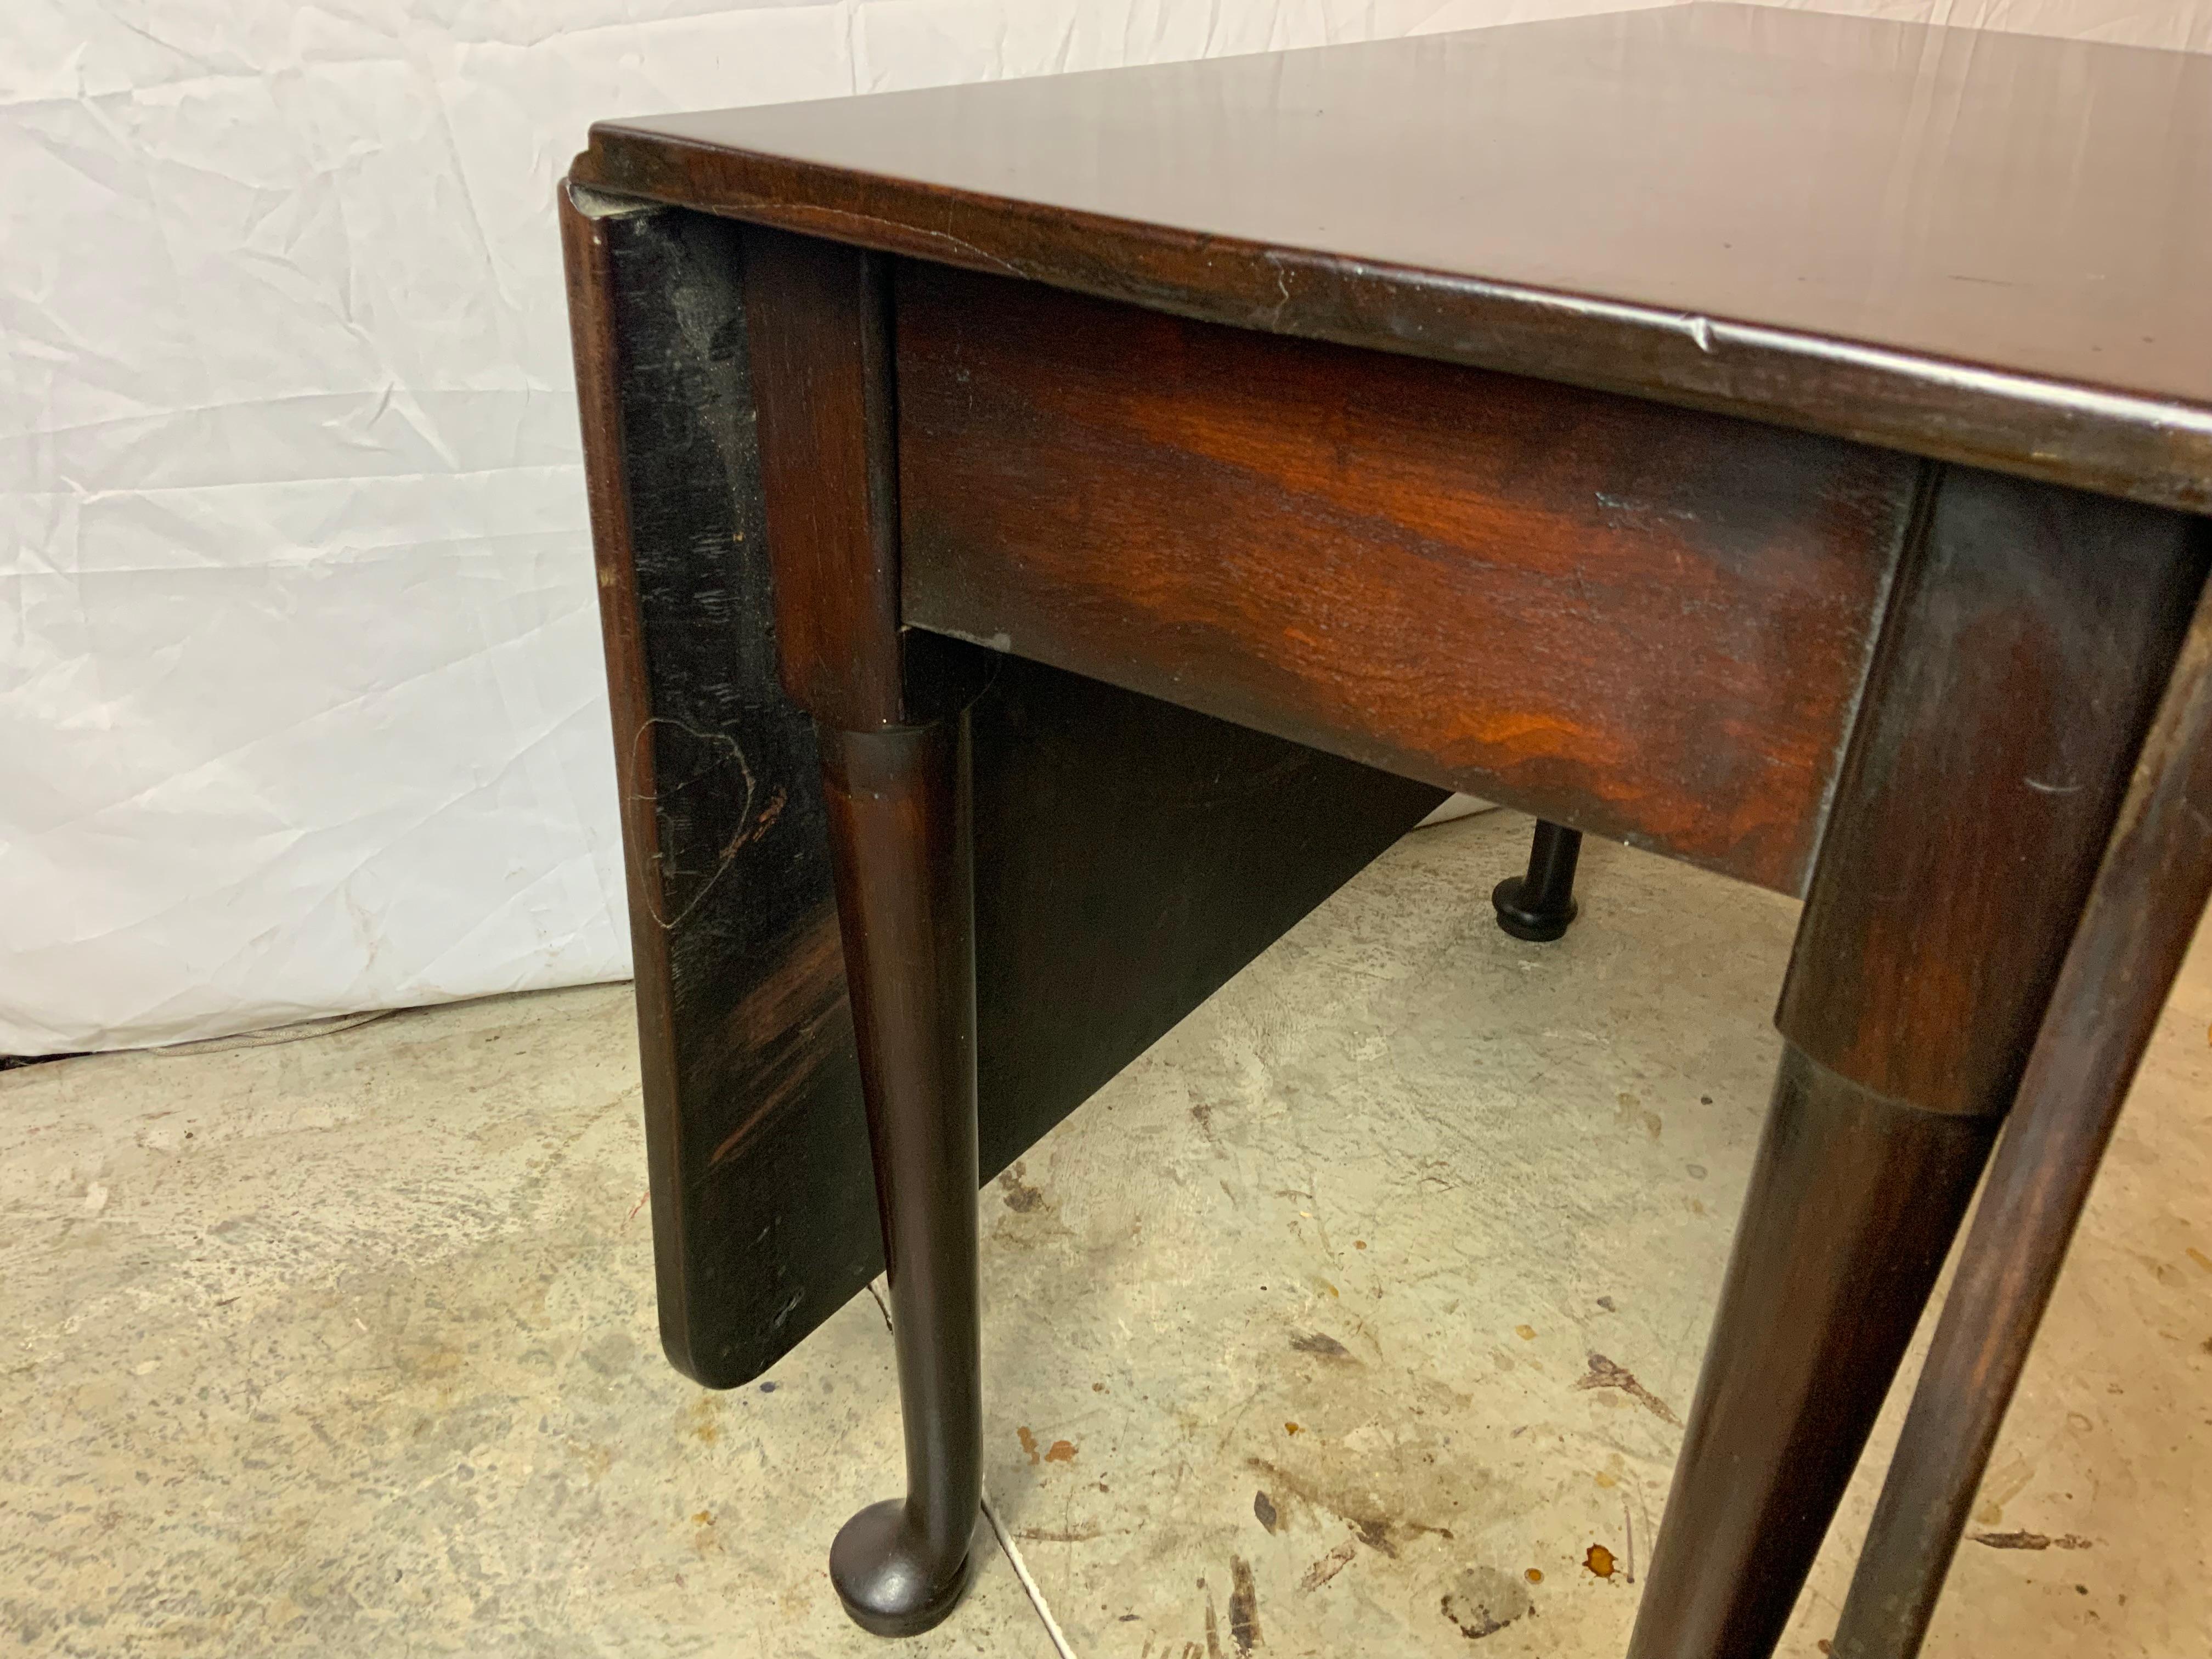 A very nice solid heavy 18th century Queen Anne drop leaf table.  Nicely tapered swing leg ending in a nice wide pad foot.  Solid Cuban Mahogany tops in very good flat condition. Original surface lightly cleaned and waxed exhibits a very nice color